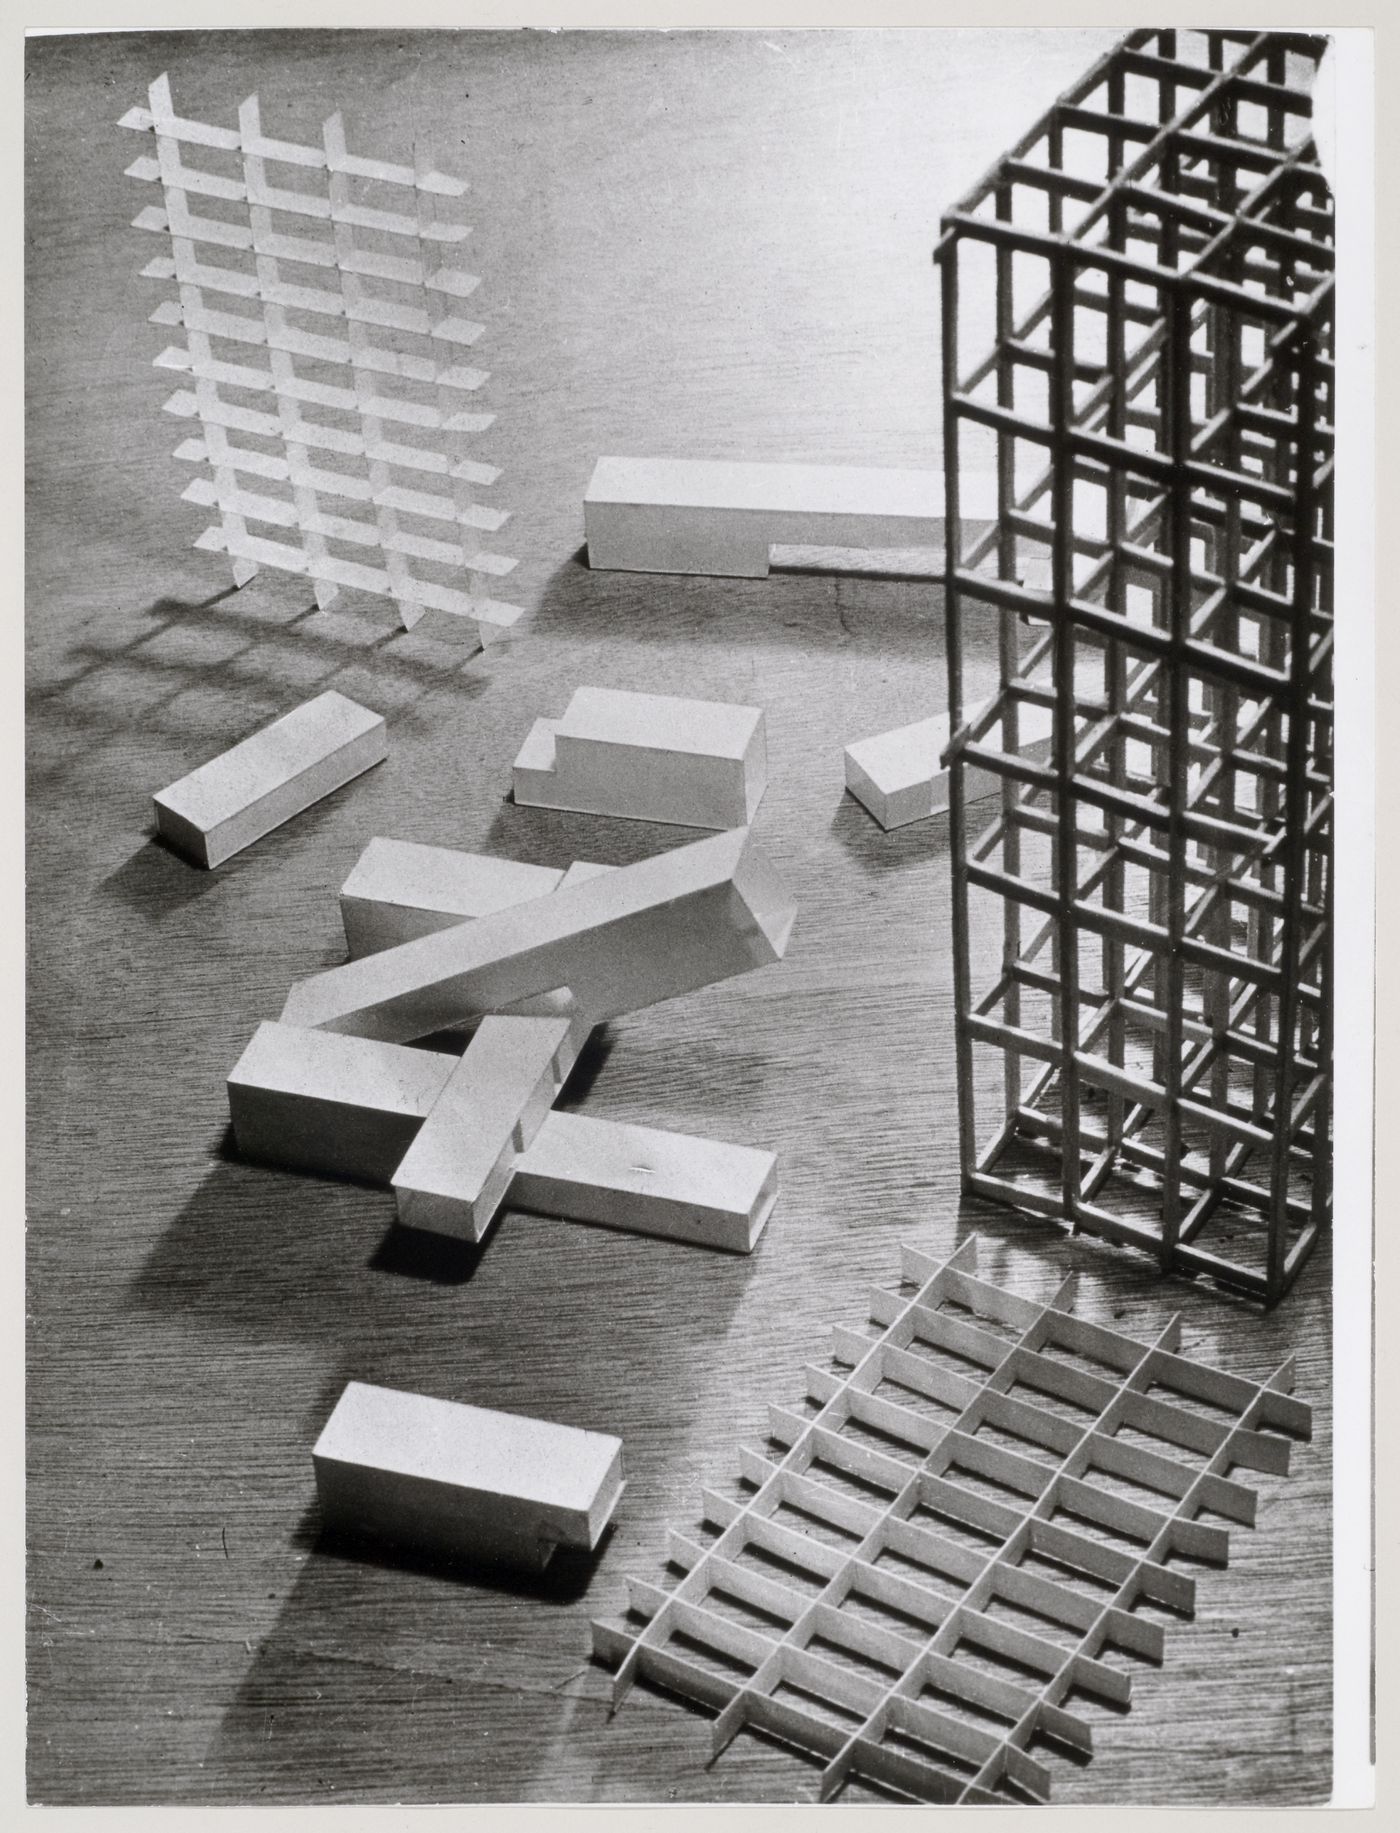 View of unassembled elements of a study model for Unité d'habitation showing the corner of the main wooden structural grid, a cardboard grid representing the loggias, and several cardboard tubes, possibly elevator and ventilation shafts, Marseille, France